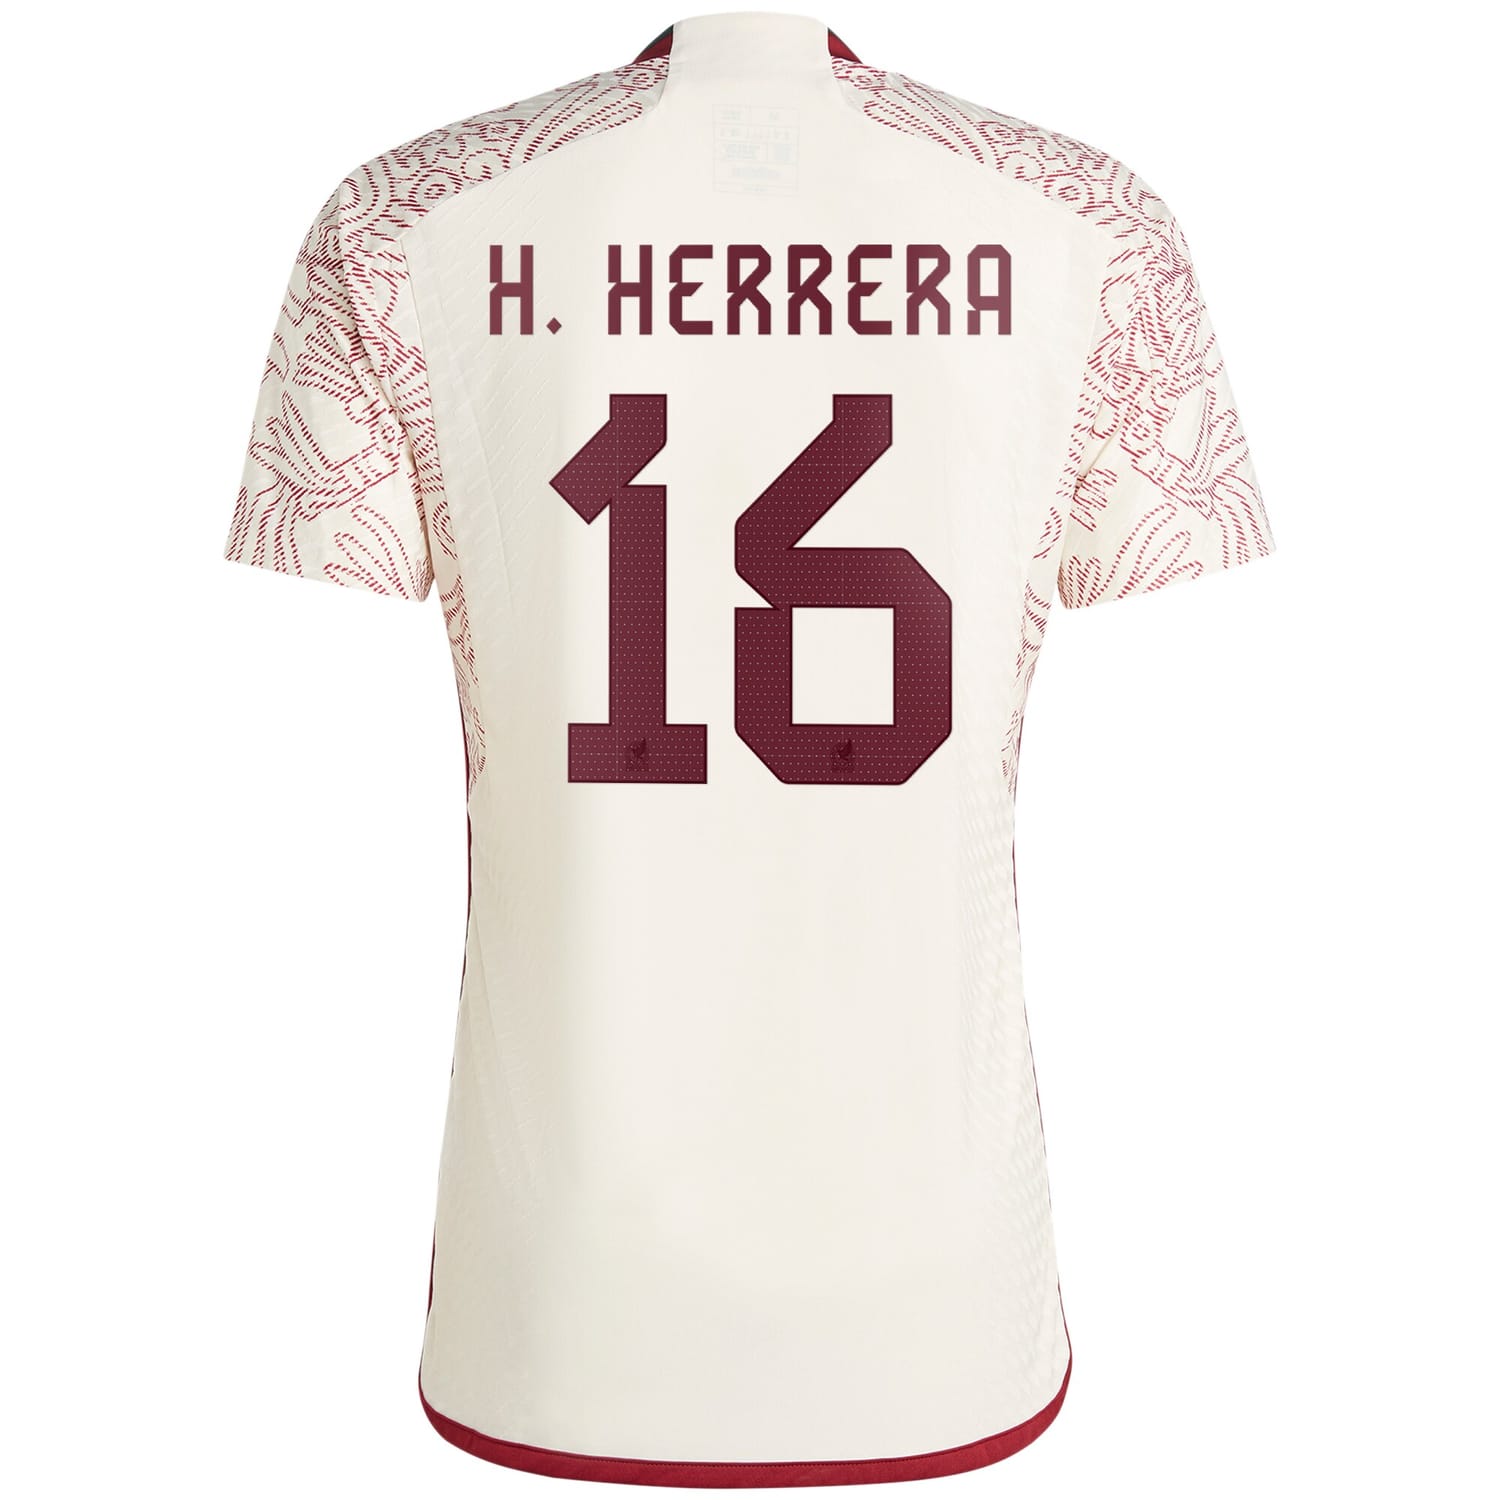 Mexico National Team Away Authentic Jersey Shirt White 2022-23 player Héctor Herrera printing for Men